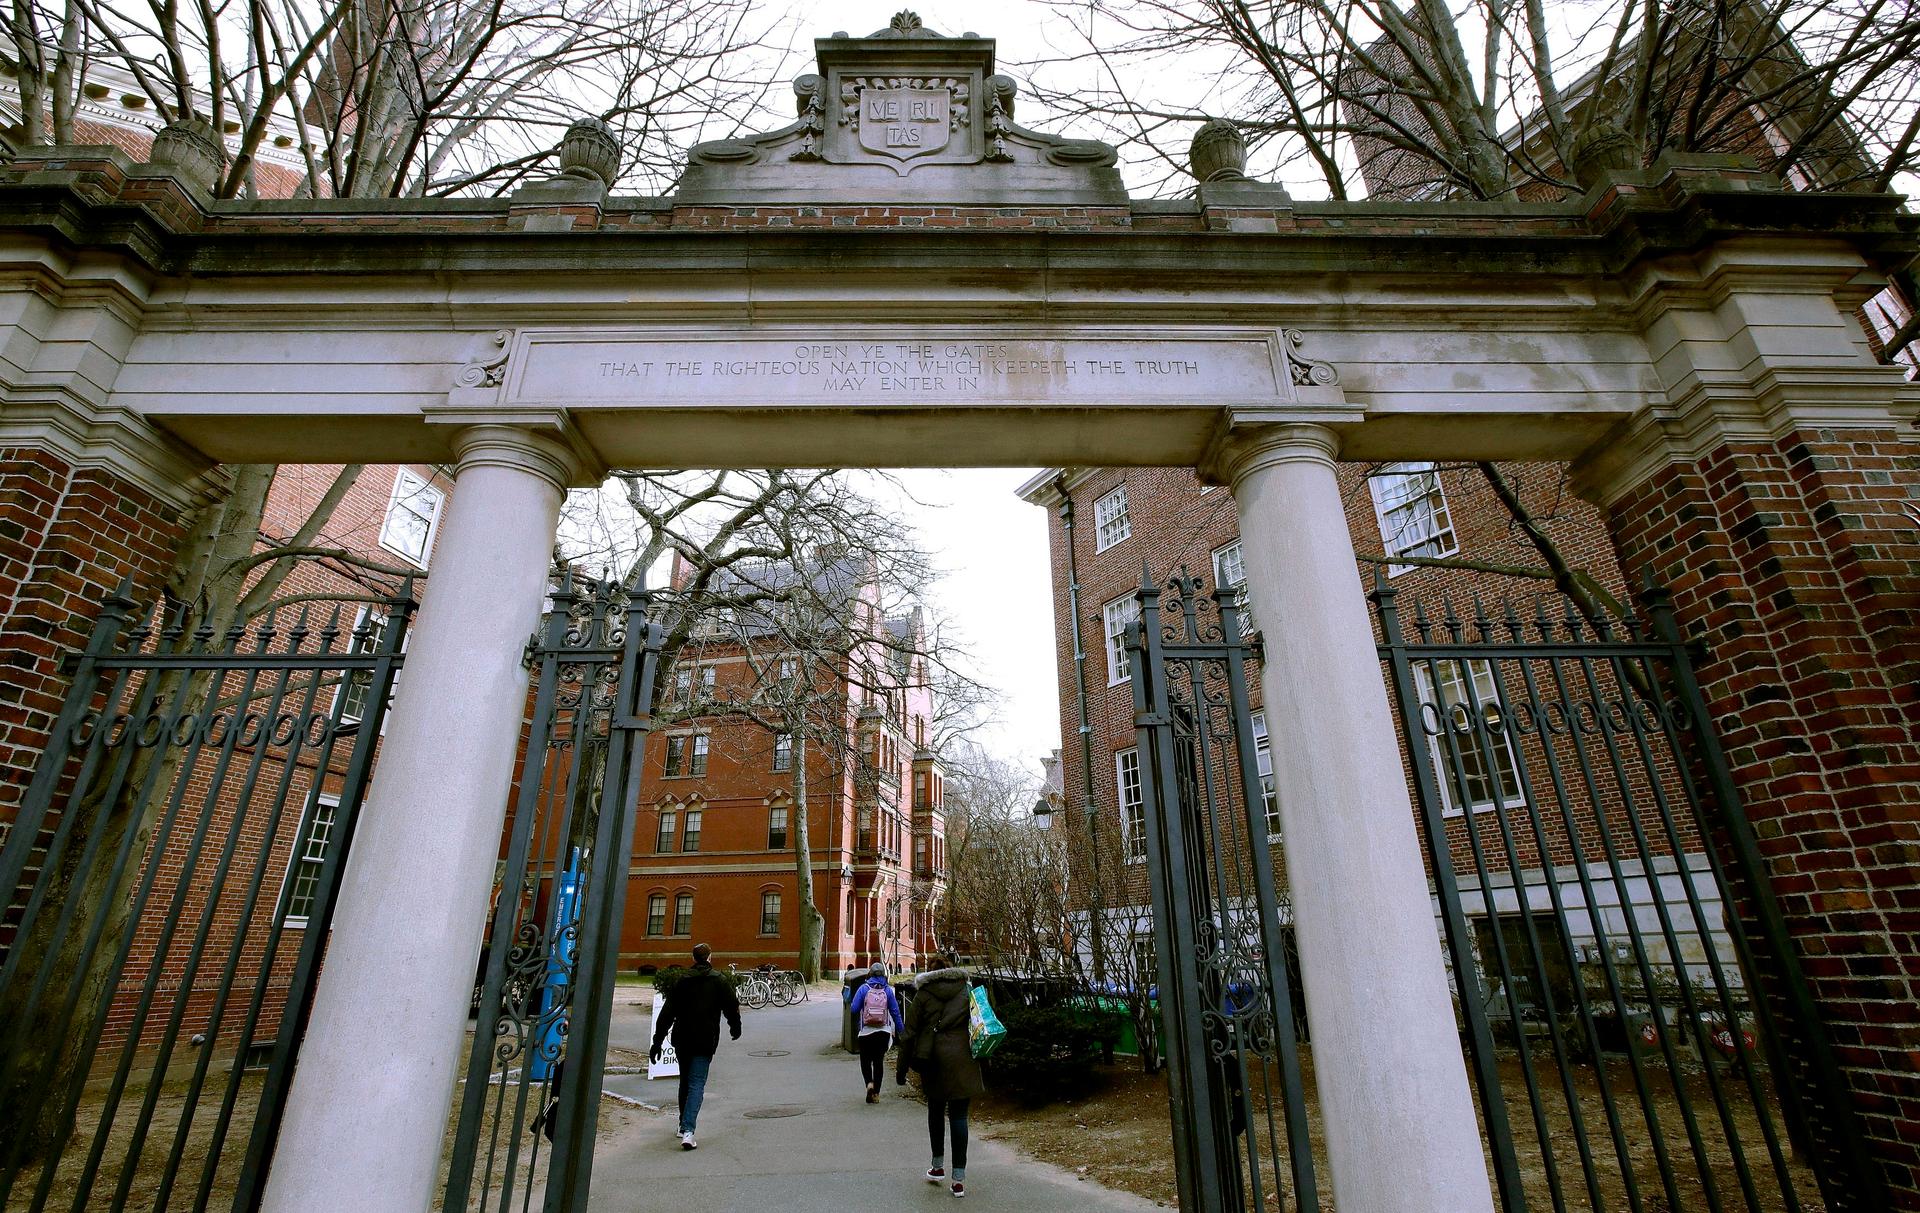 A gate opened from a tall brick archway on a college campus